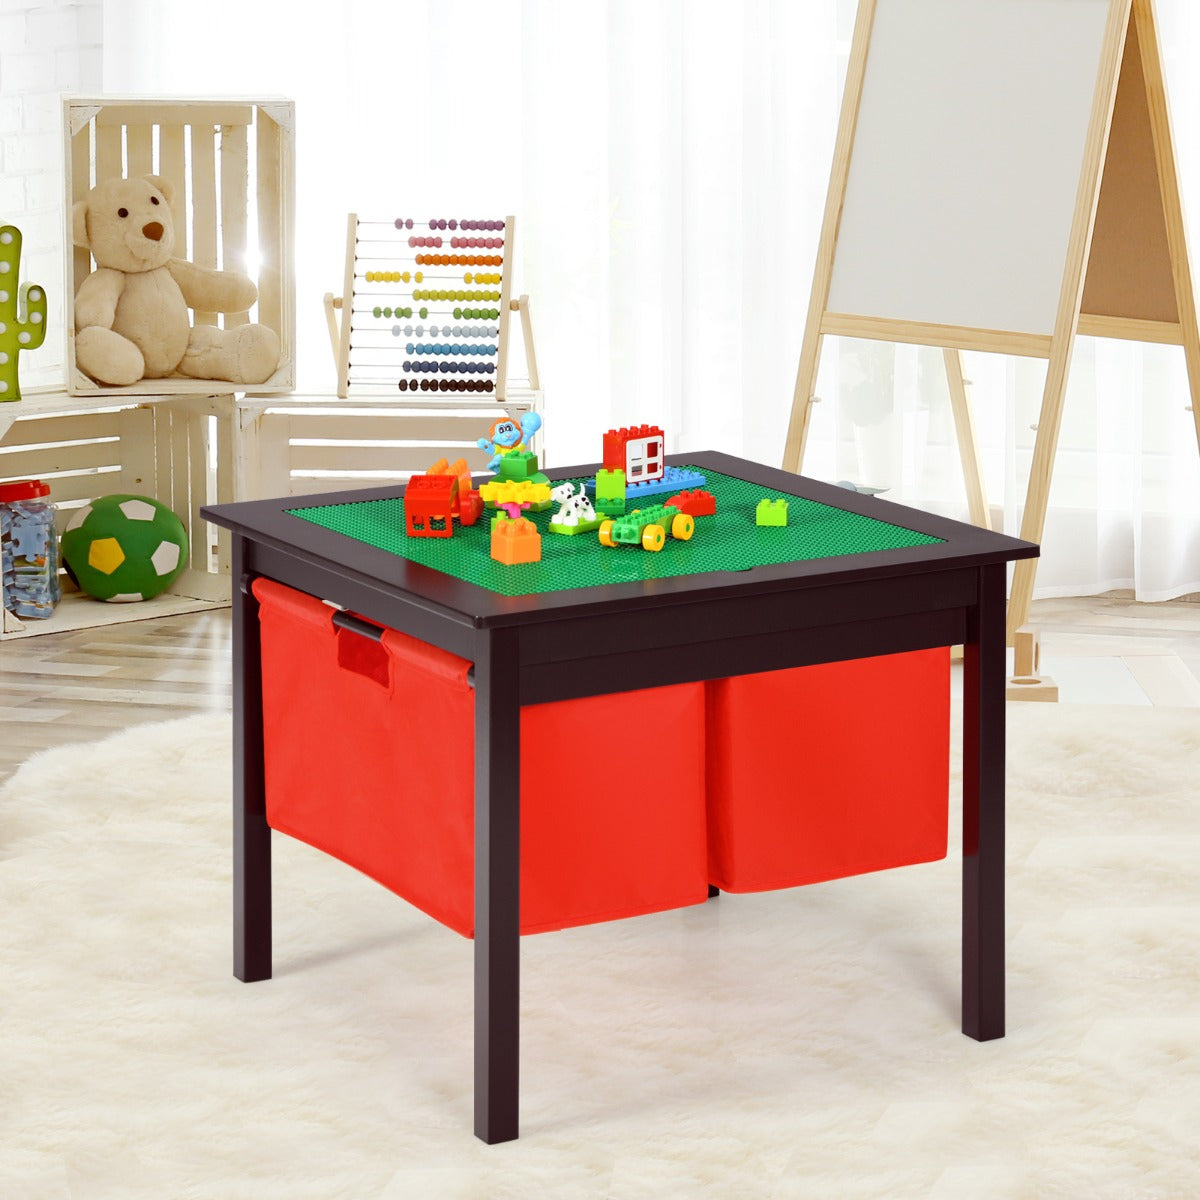 Costway Kids Activity Table with 2 Non woven Fabric Drawers Espresso